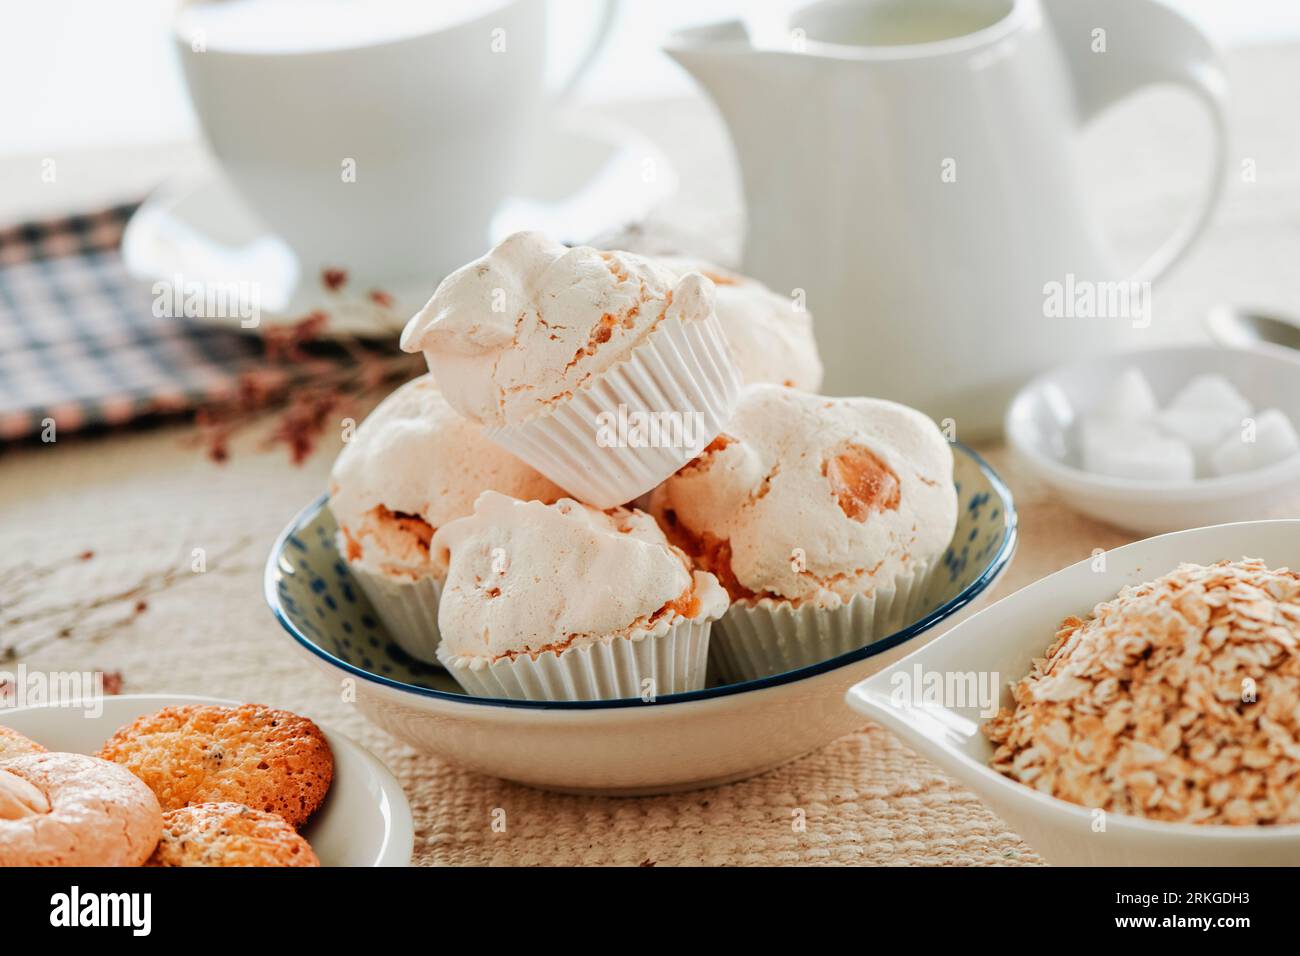 a ceramic bowl with some spanish merengues almendrados, baked meringues with almonds, on a table next to a white ceramic plate with some cookies Stock Photo